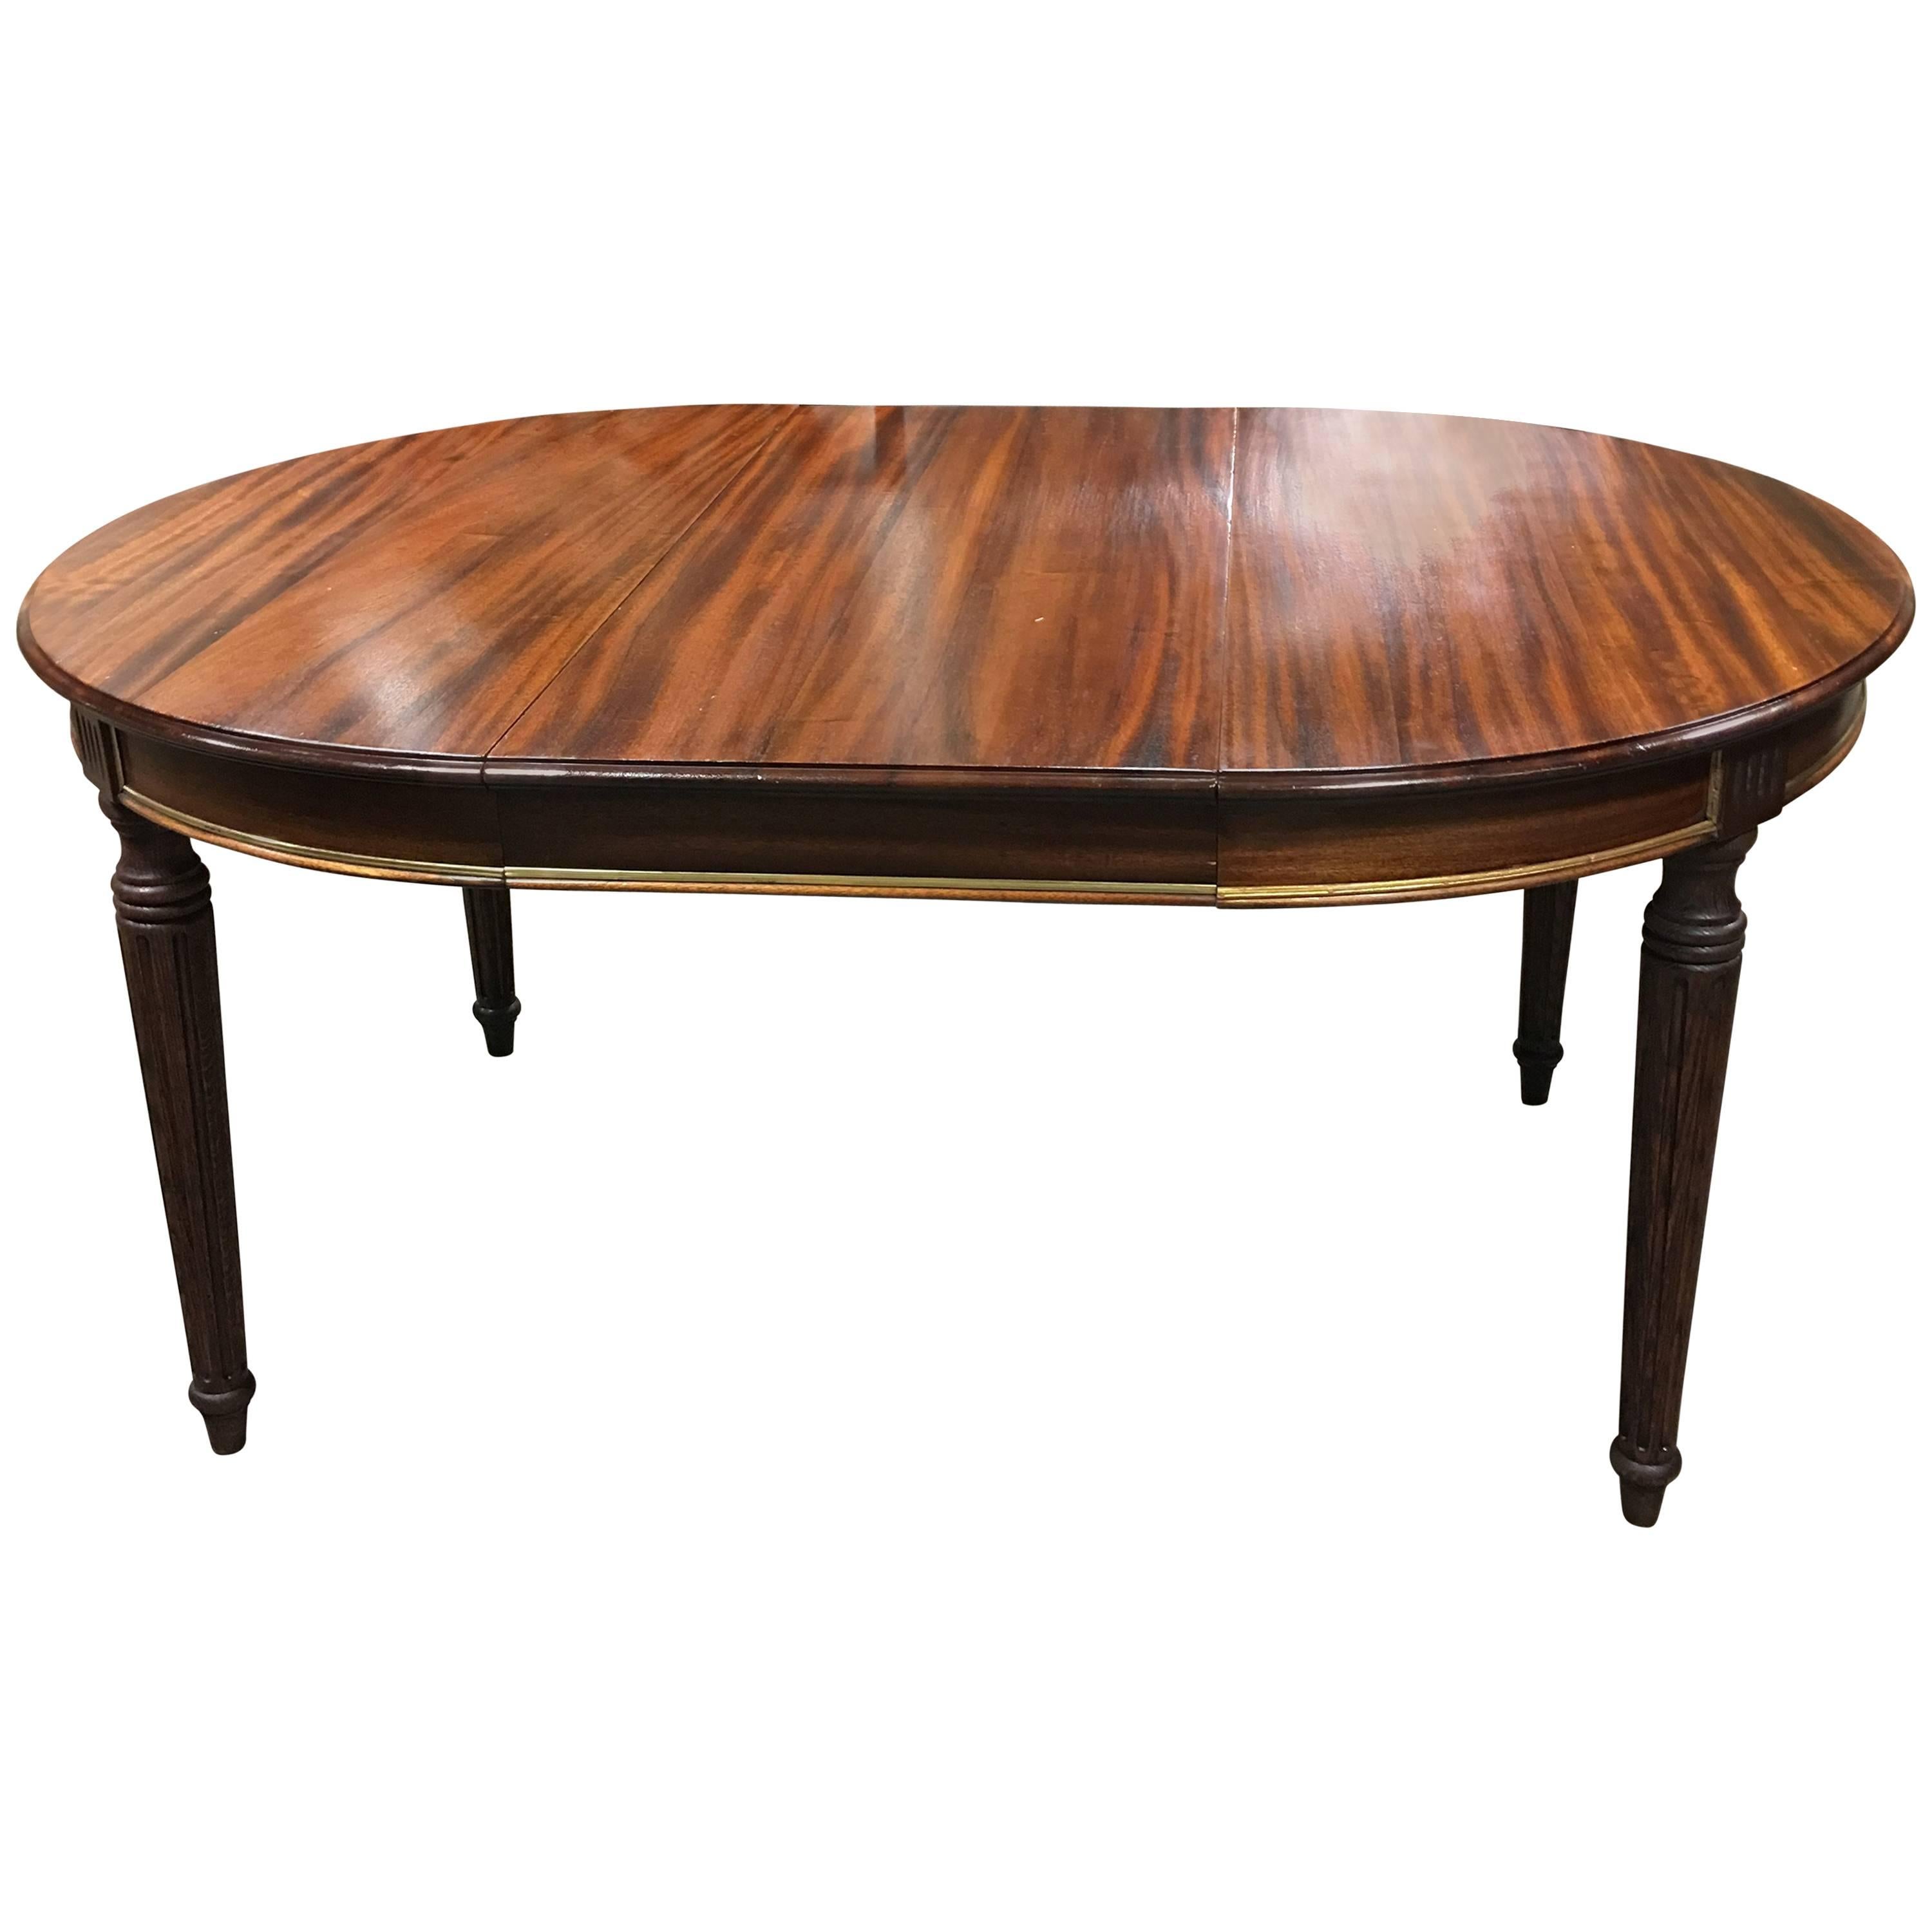  ON SALE 19th Century Dining Table French Mahogany 43'' x 43'' Extends to 81''  For Sale